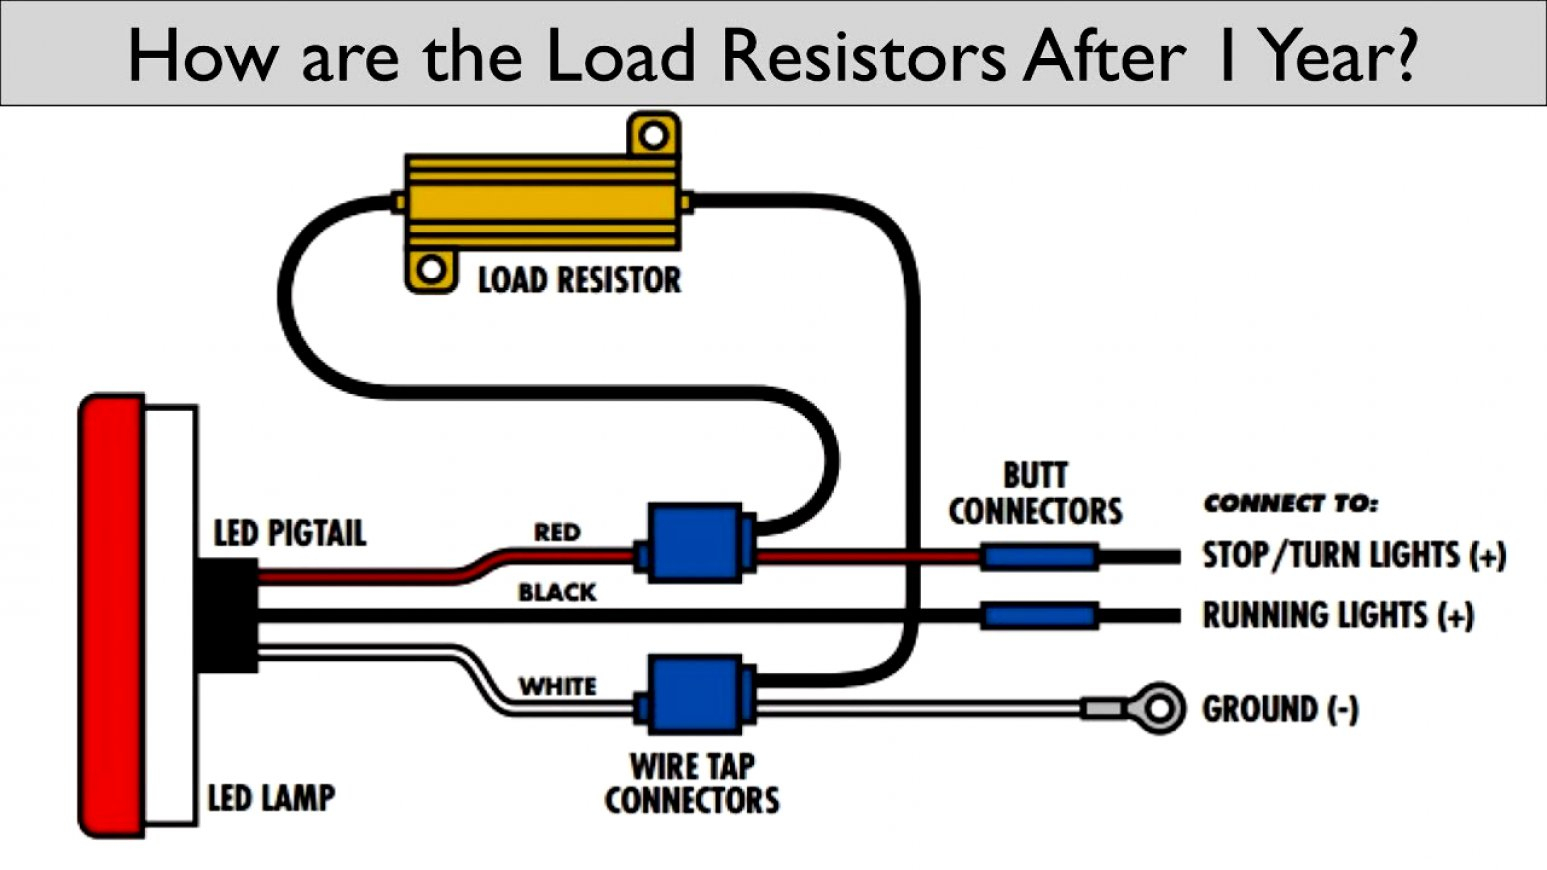 Wiring A Resistor For Led Lights - Wiring Diagrams Base - Led Load Resistor Wiring Diagram